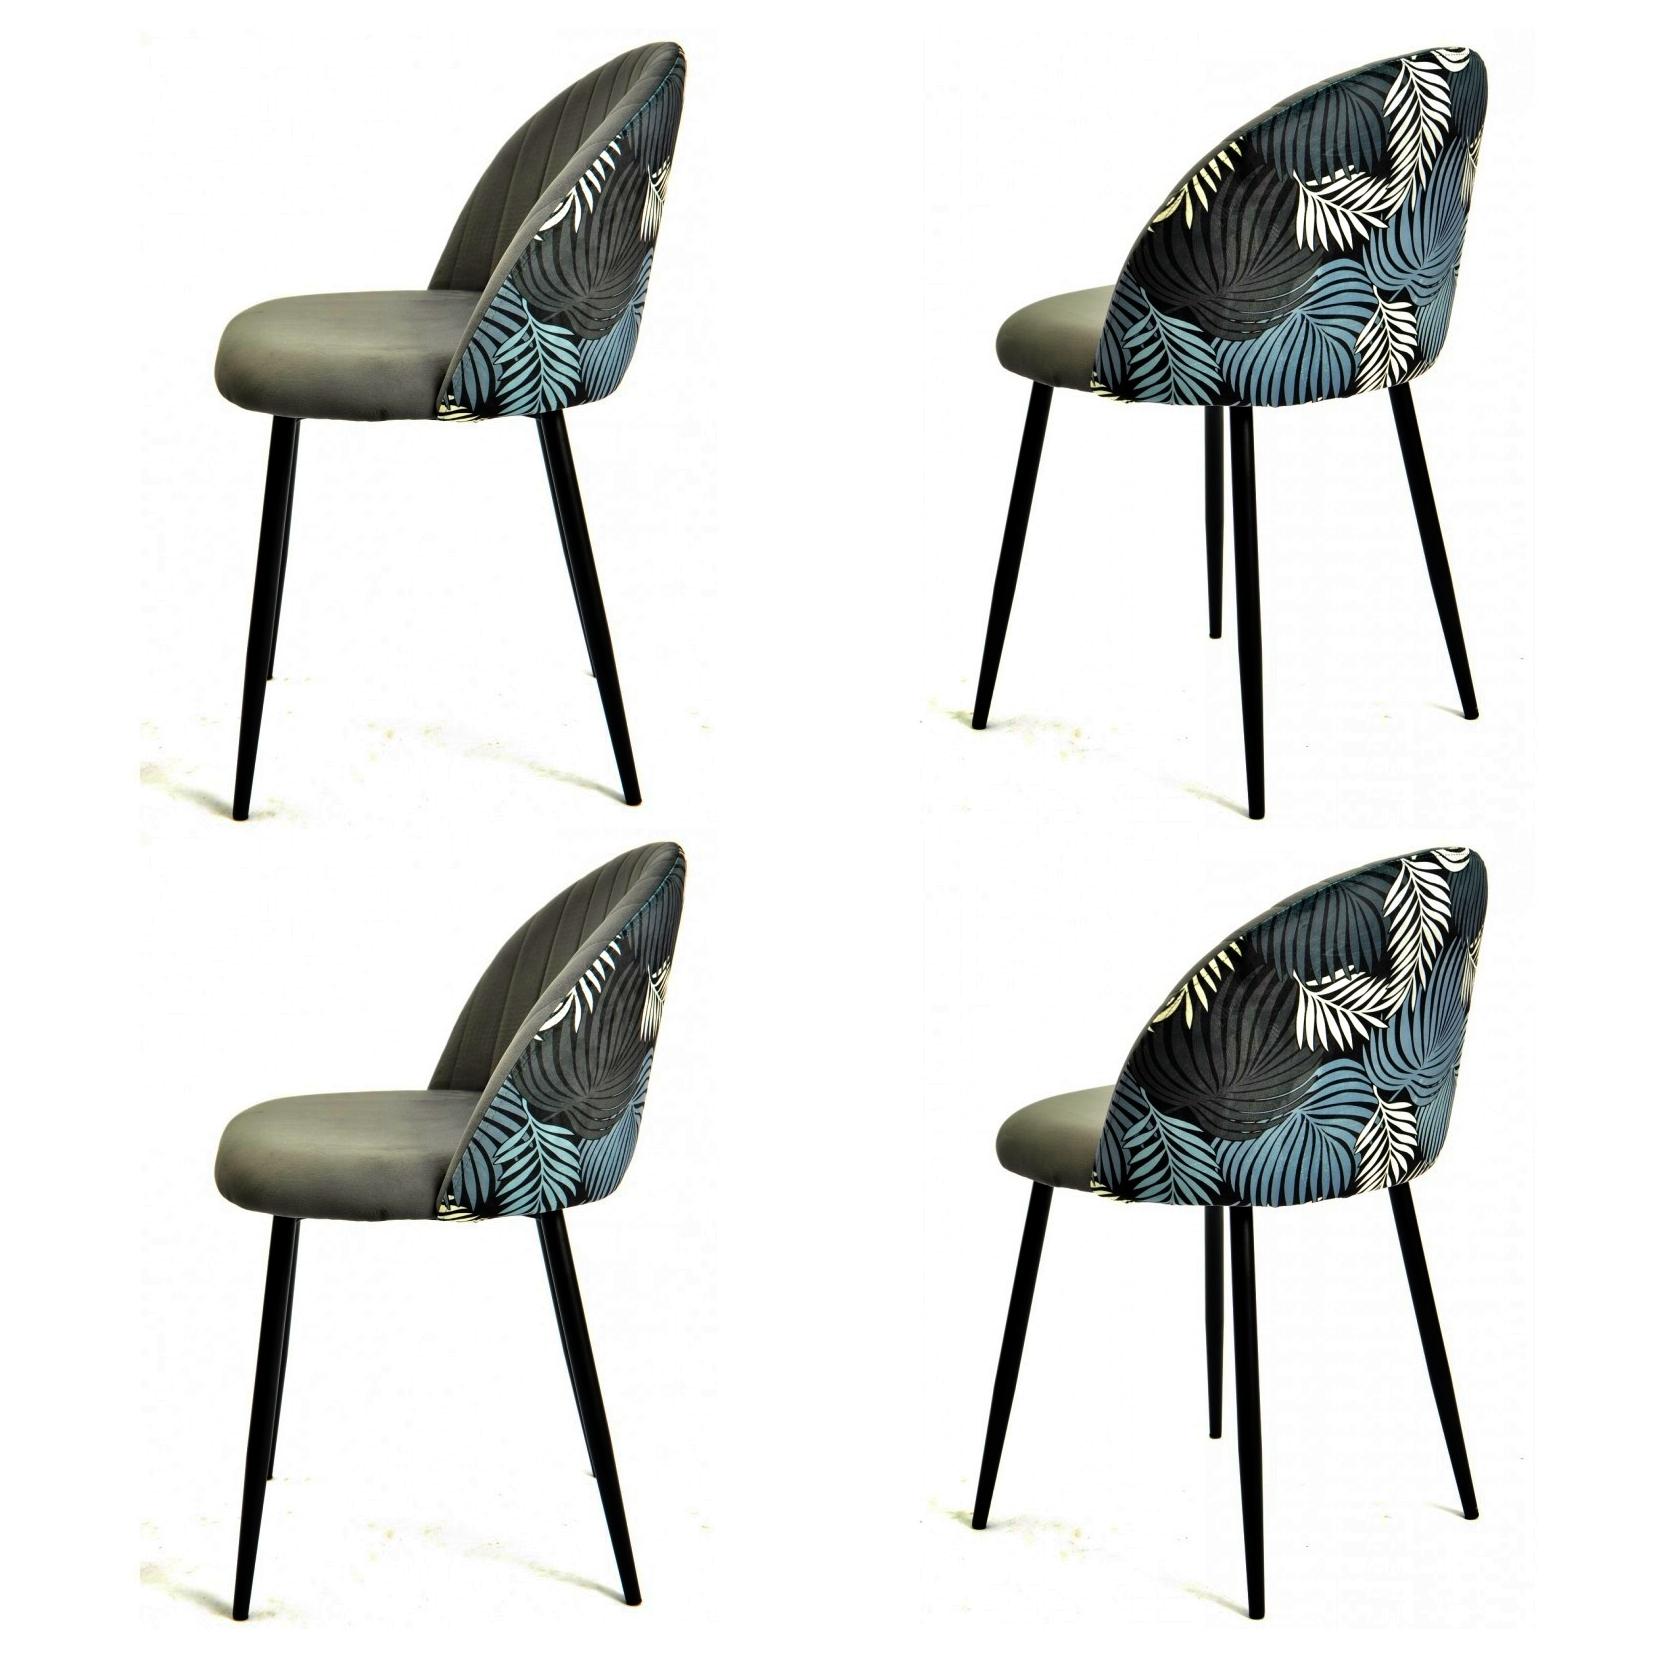 Spanish New 4 Gray Velvet Upholstered Chairs with Floral Back For Sale